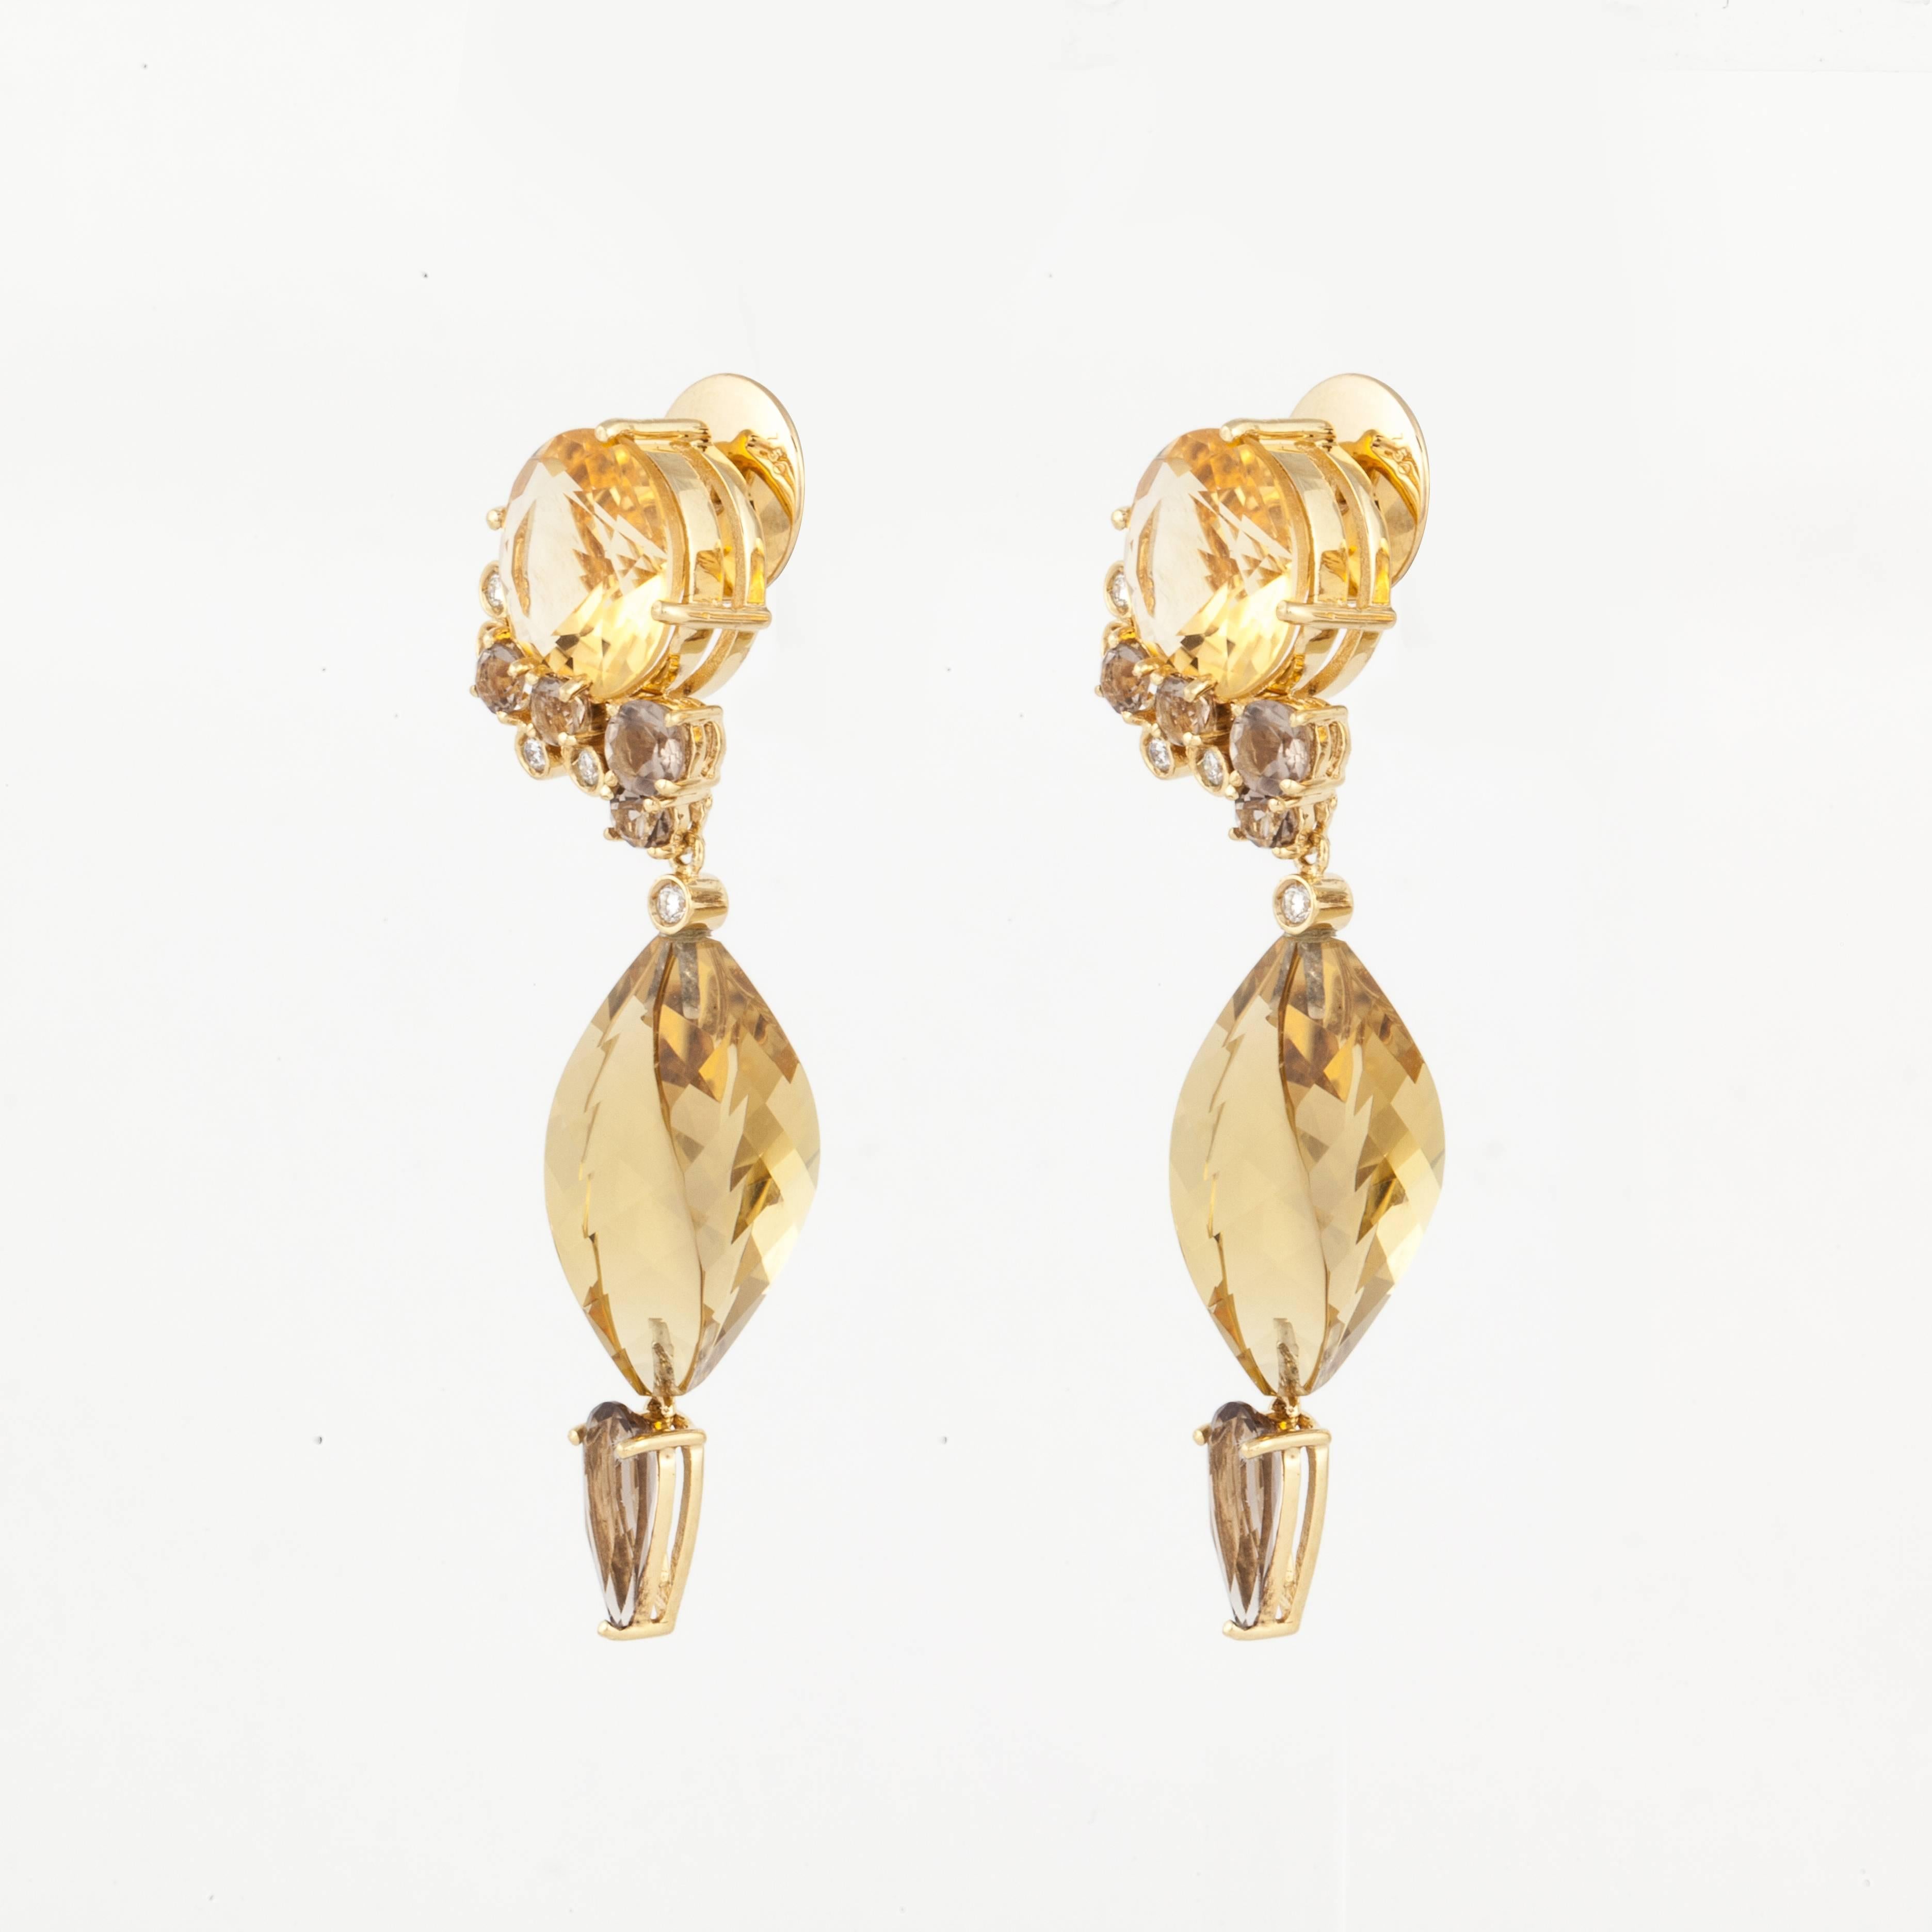 Denoir 18K yellow gold earrings featuring citrines with dangling topaz stones highlighted with diamonds.  There are ten round diamonds with a total weight of 0.30 carats.  The earrings measure 2 1/8 inches in length and 5/8 inches wide.  They have